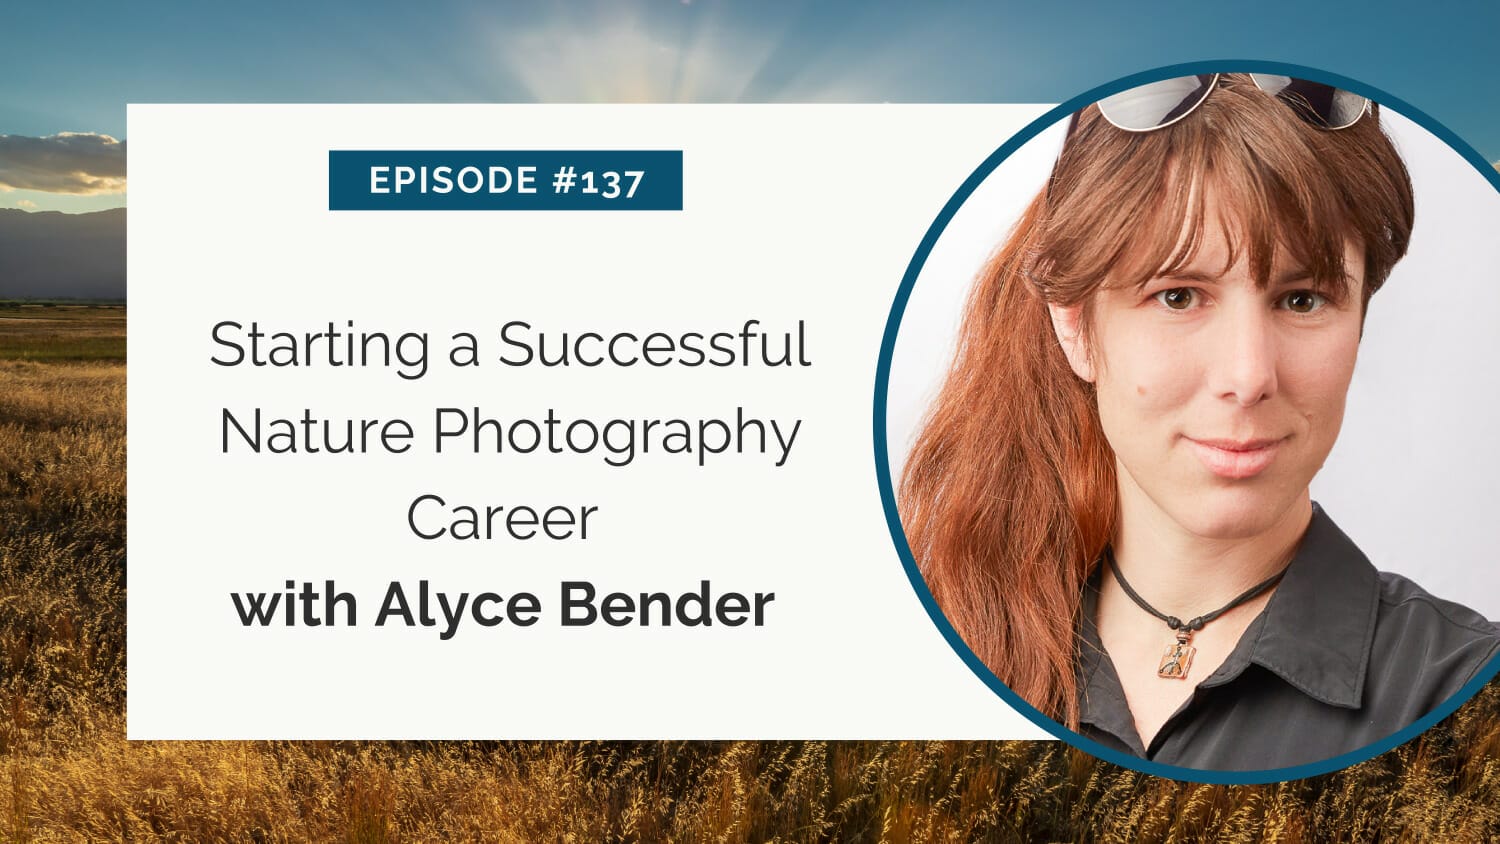 Podcast episode 137: starting a successful nature photography career with alyce bender.